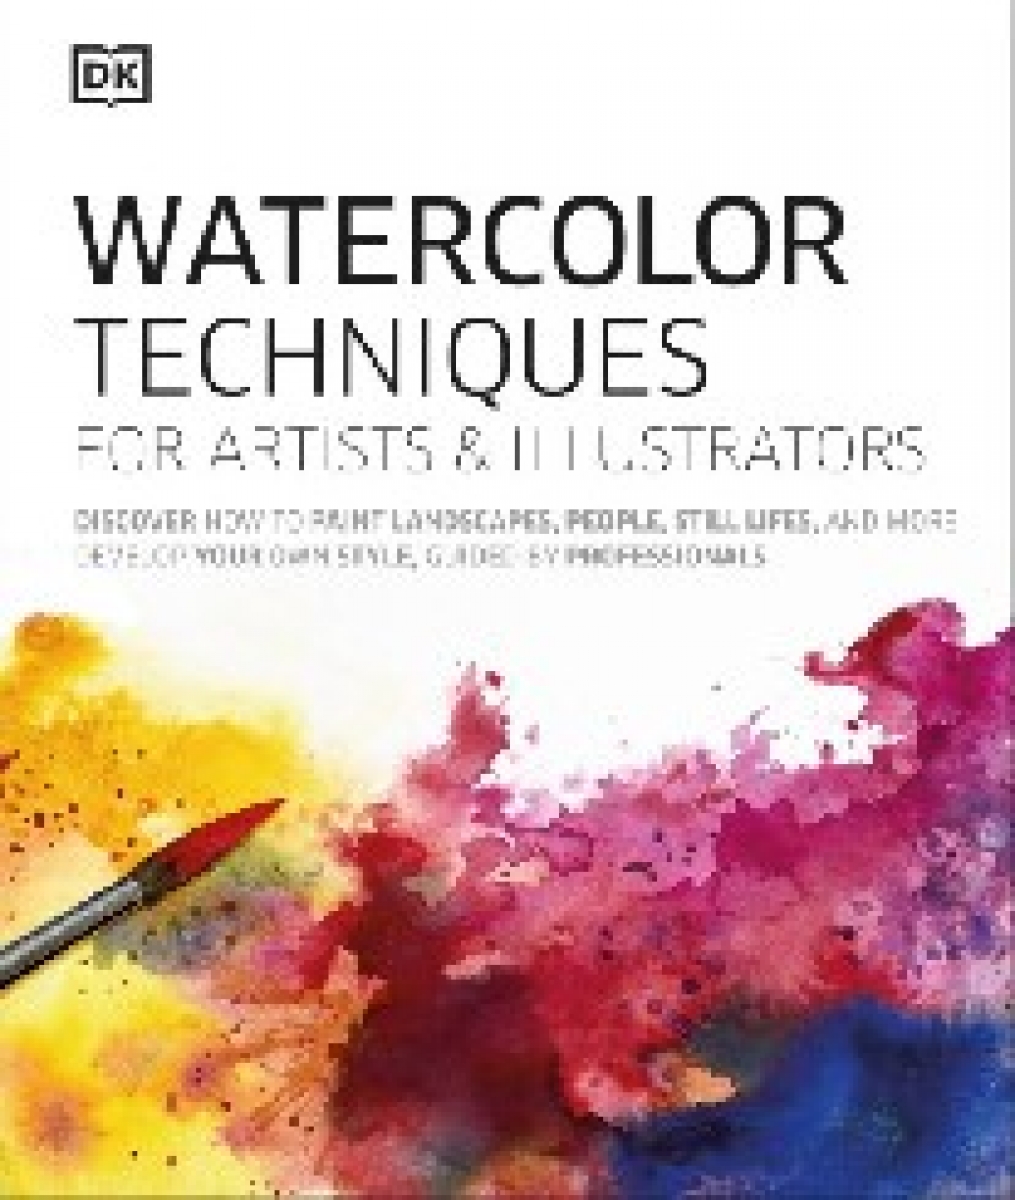 Dk Watercolor Techniques for Artists and Illustrators: Learn How to Paint Landscapes, People, Still Lifes, and More. 